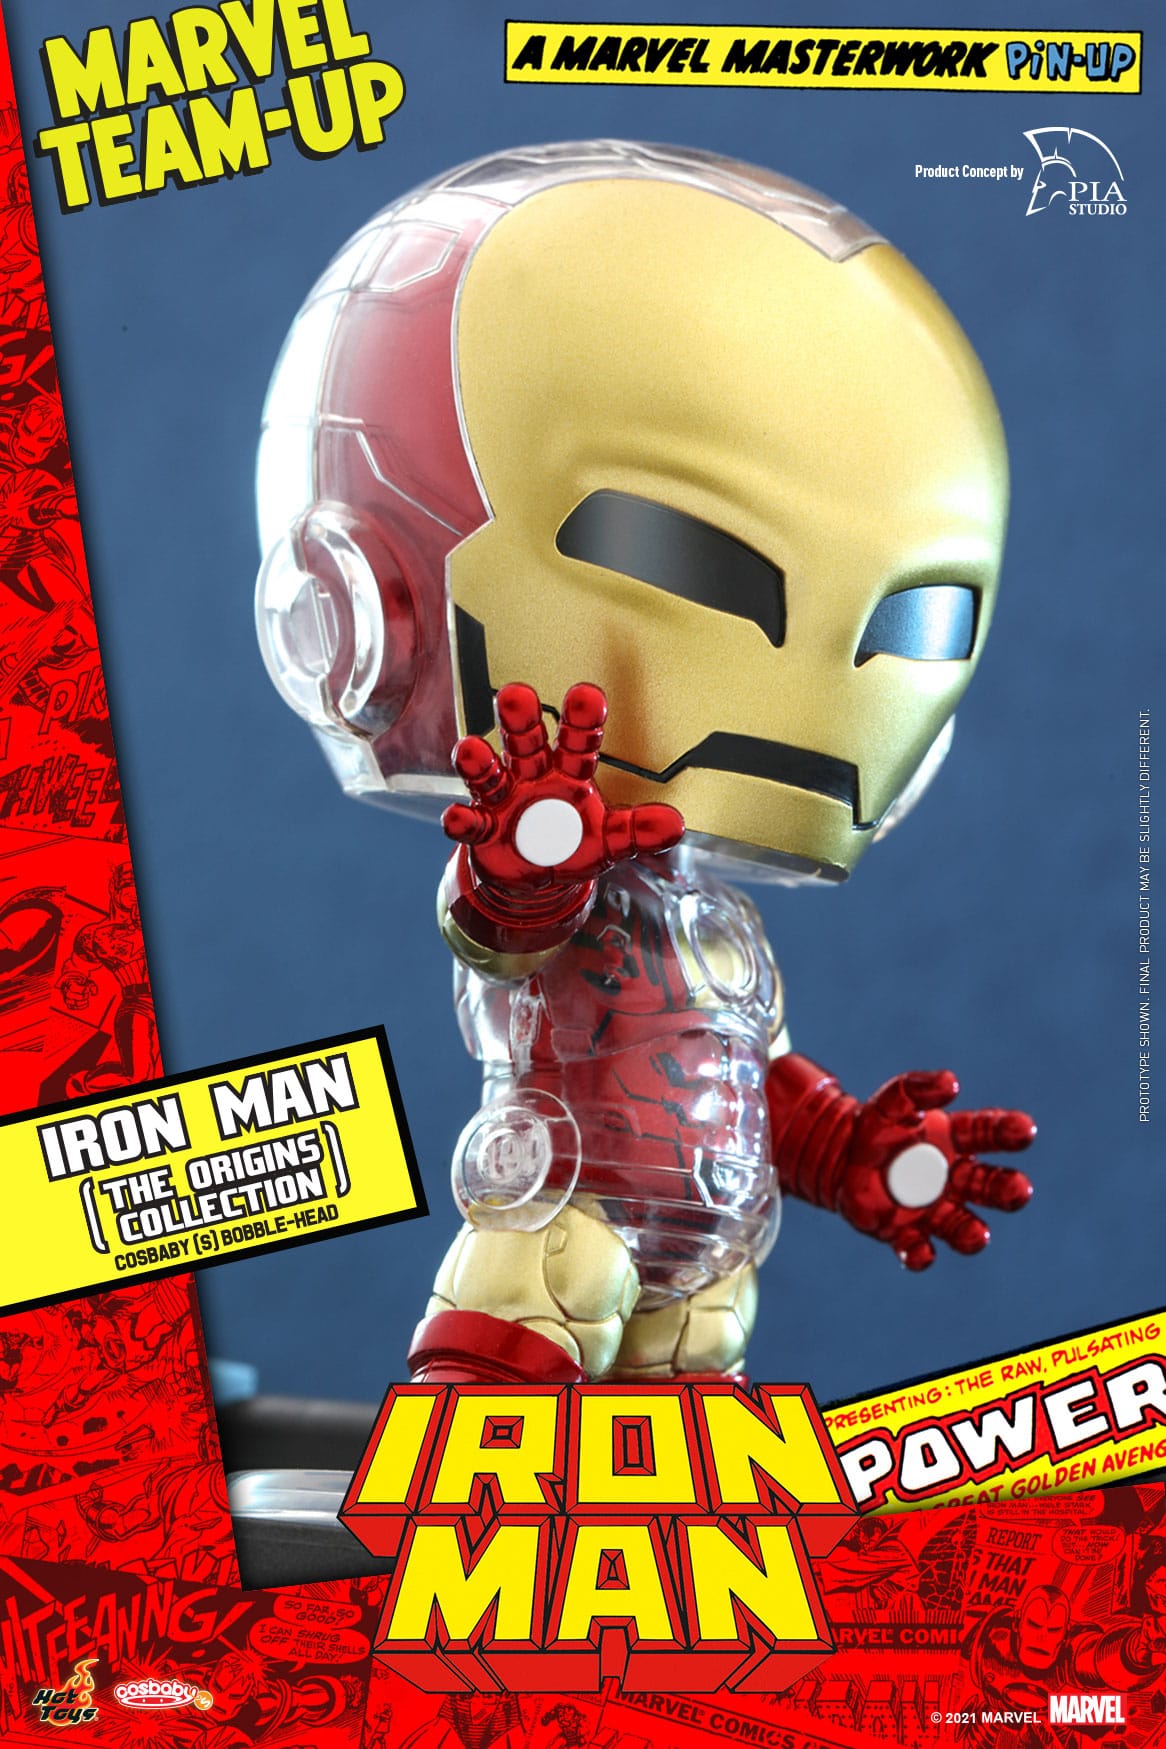 Iron Man (The Collection Origins) Cosbaby